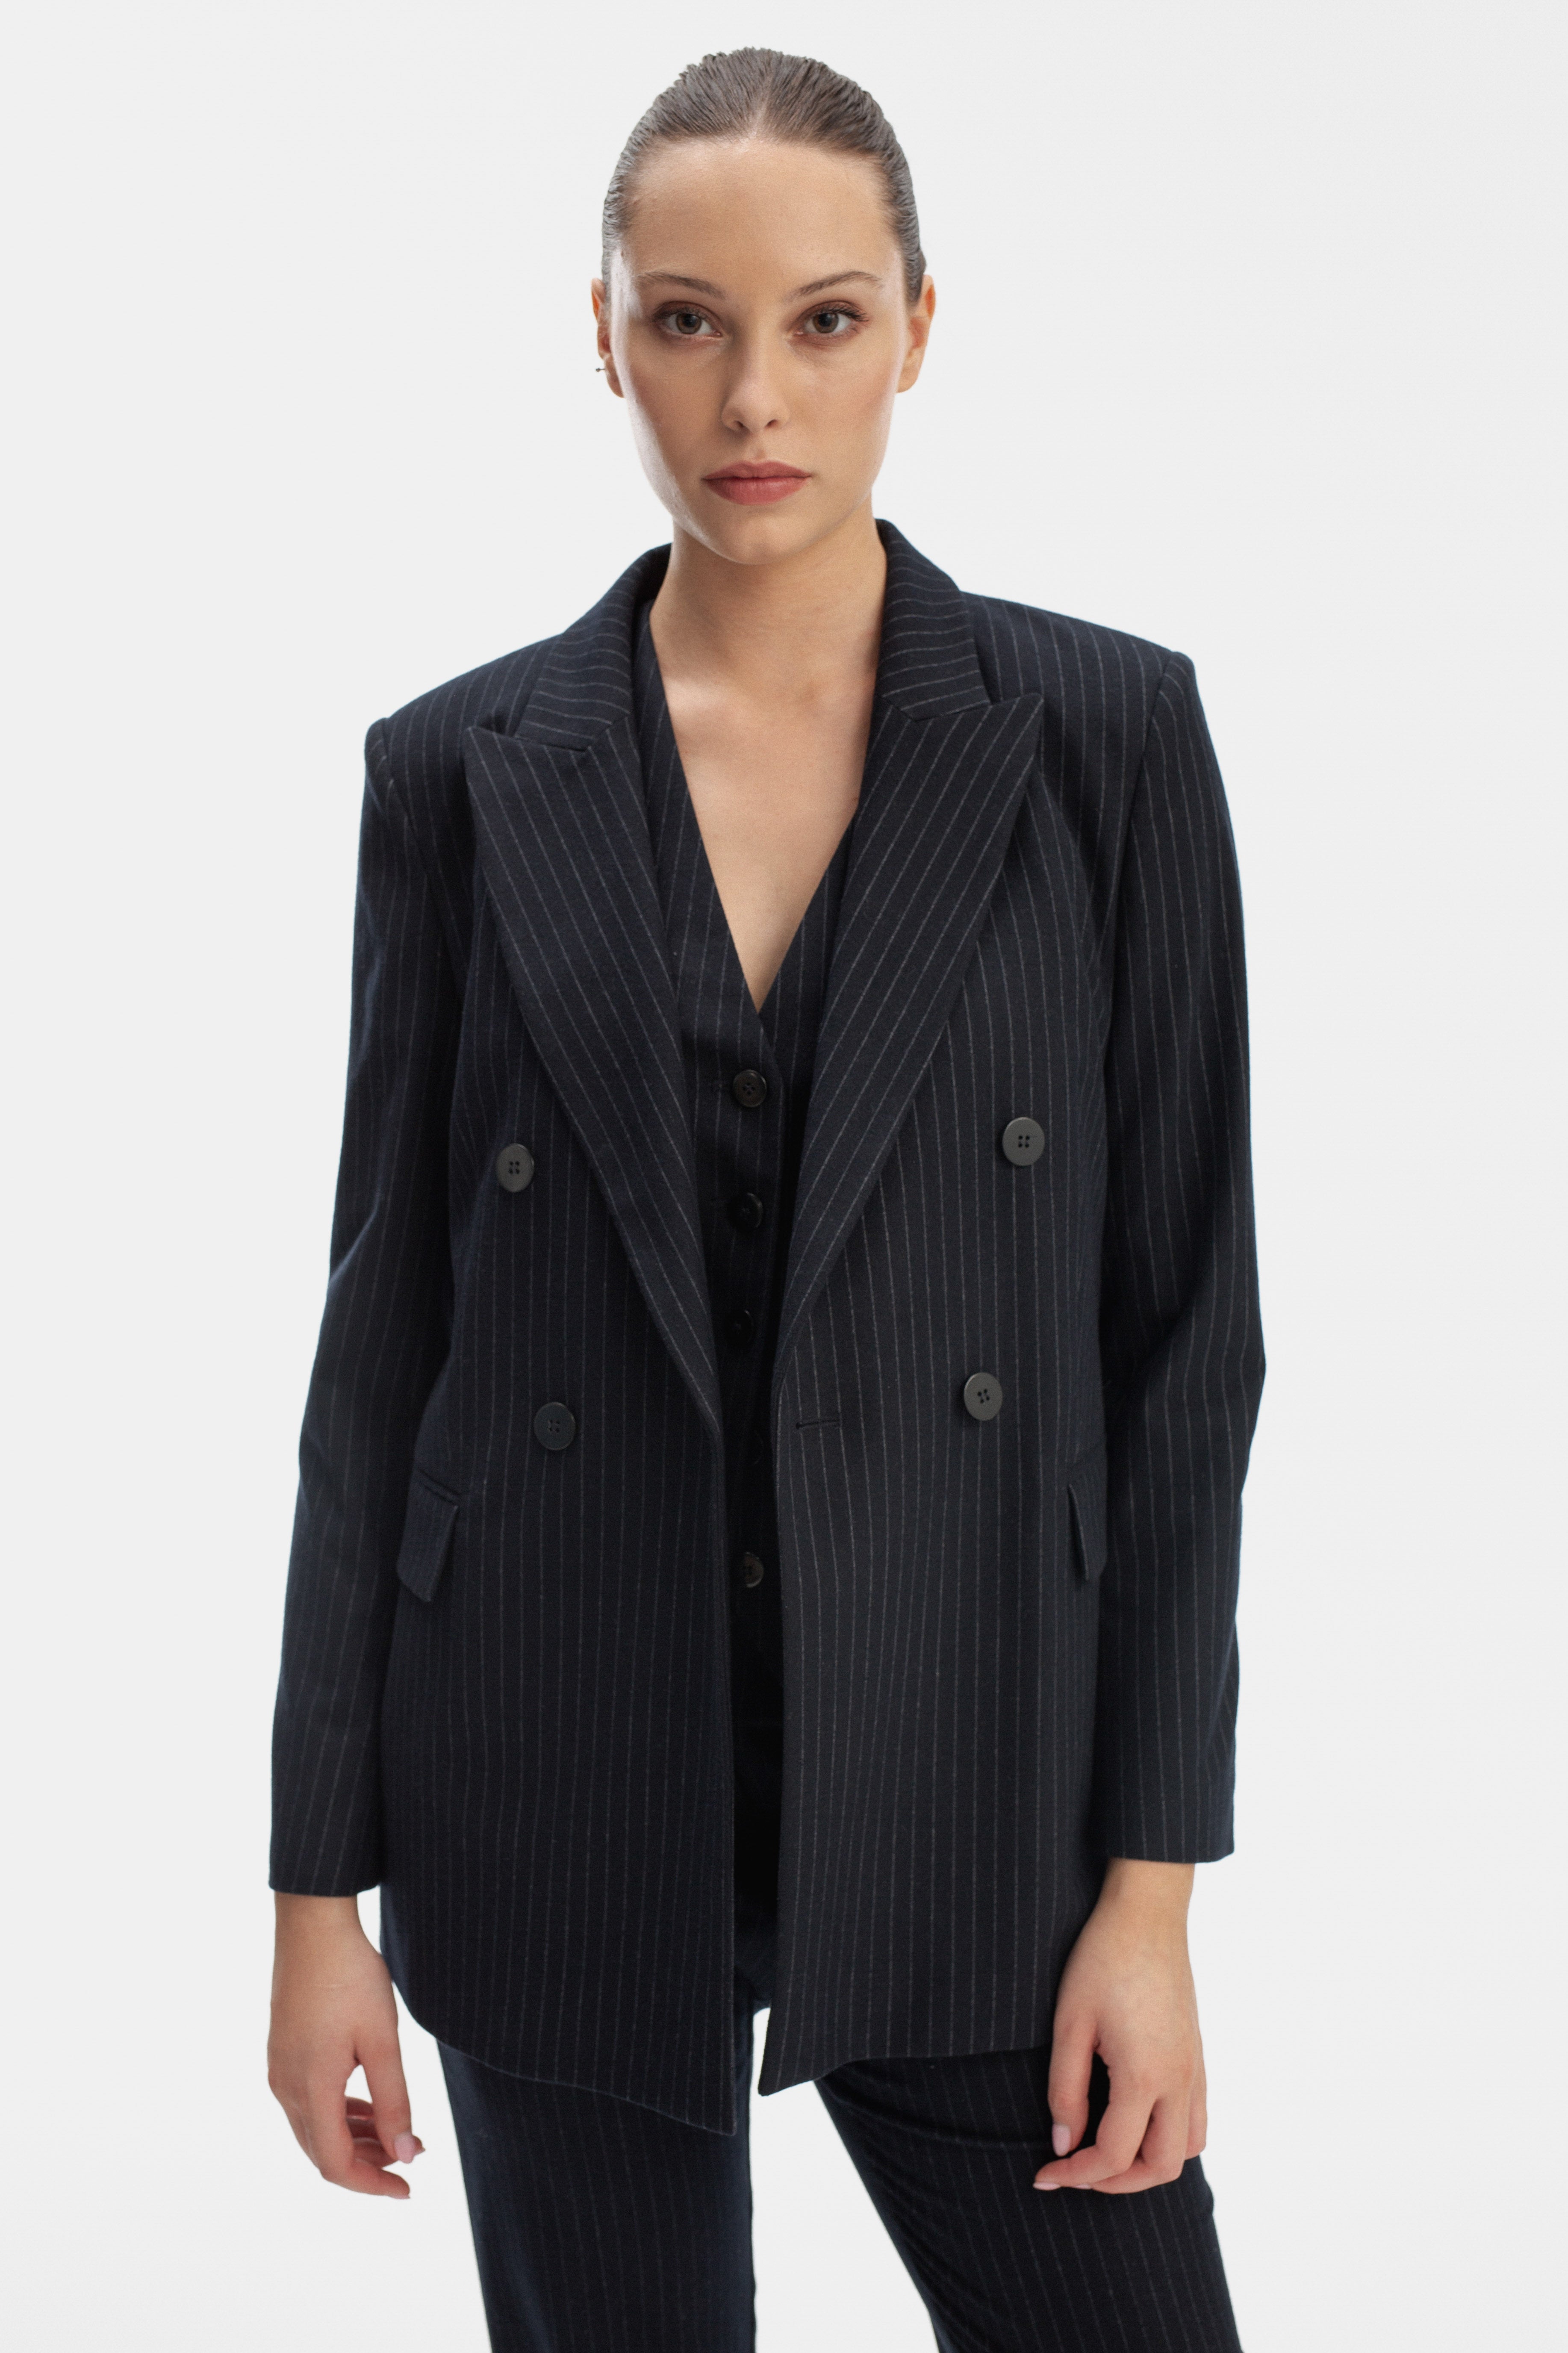 NAVY CLASSIC DOUBLE-BREASTED JACKET